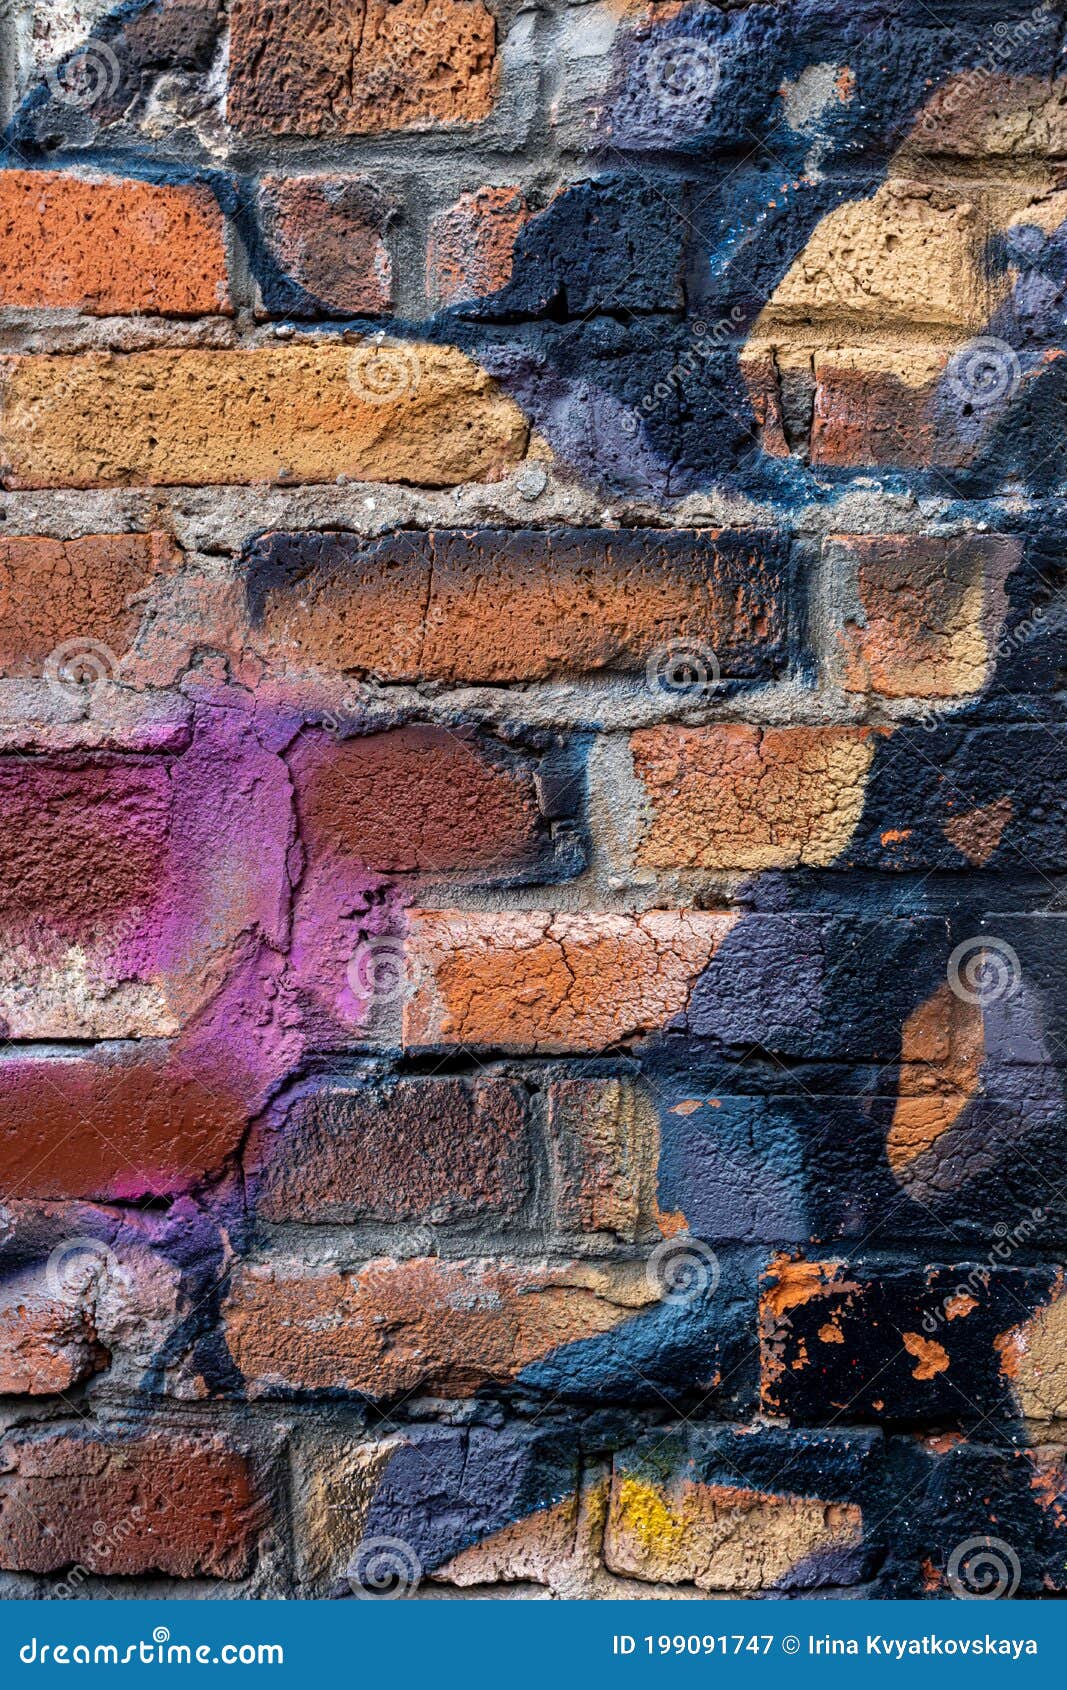 Painted Brick Wall Texture: Background Image & Pictures